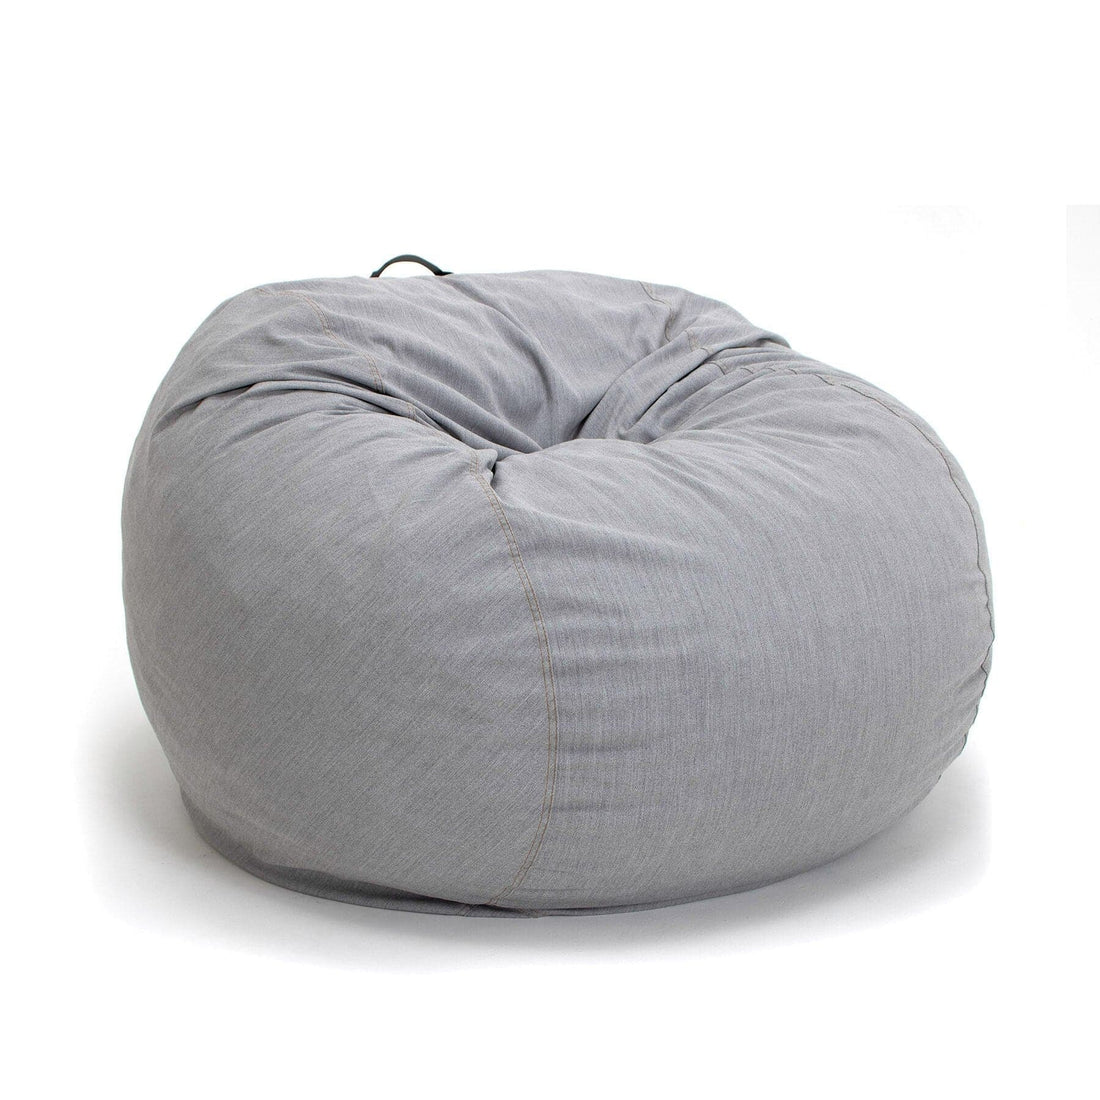 The 11 Best Bean Bag Chairs of 2024, Tested and Reviewed